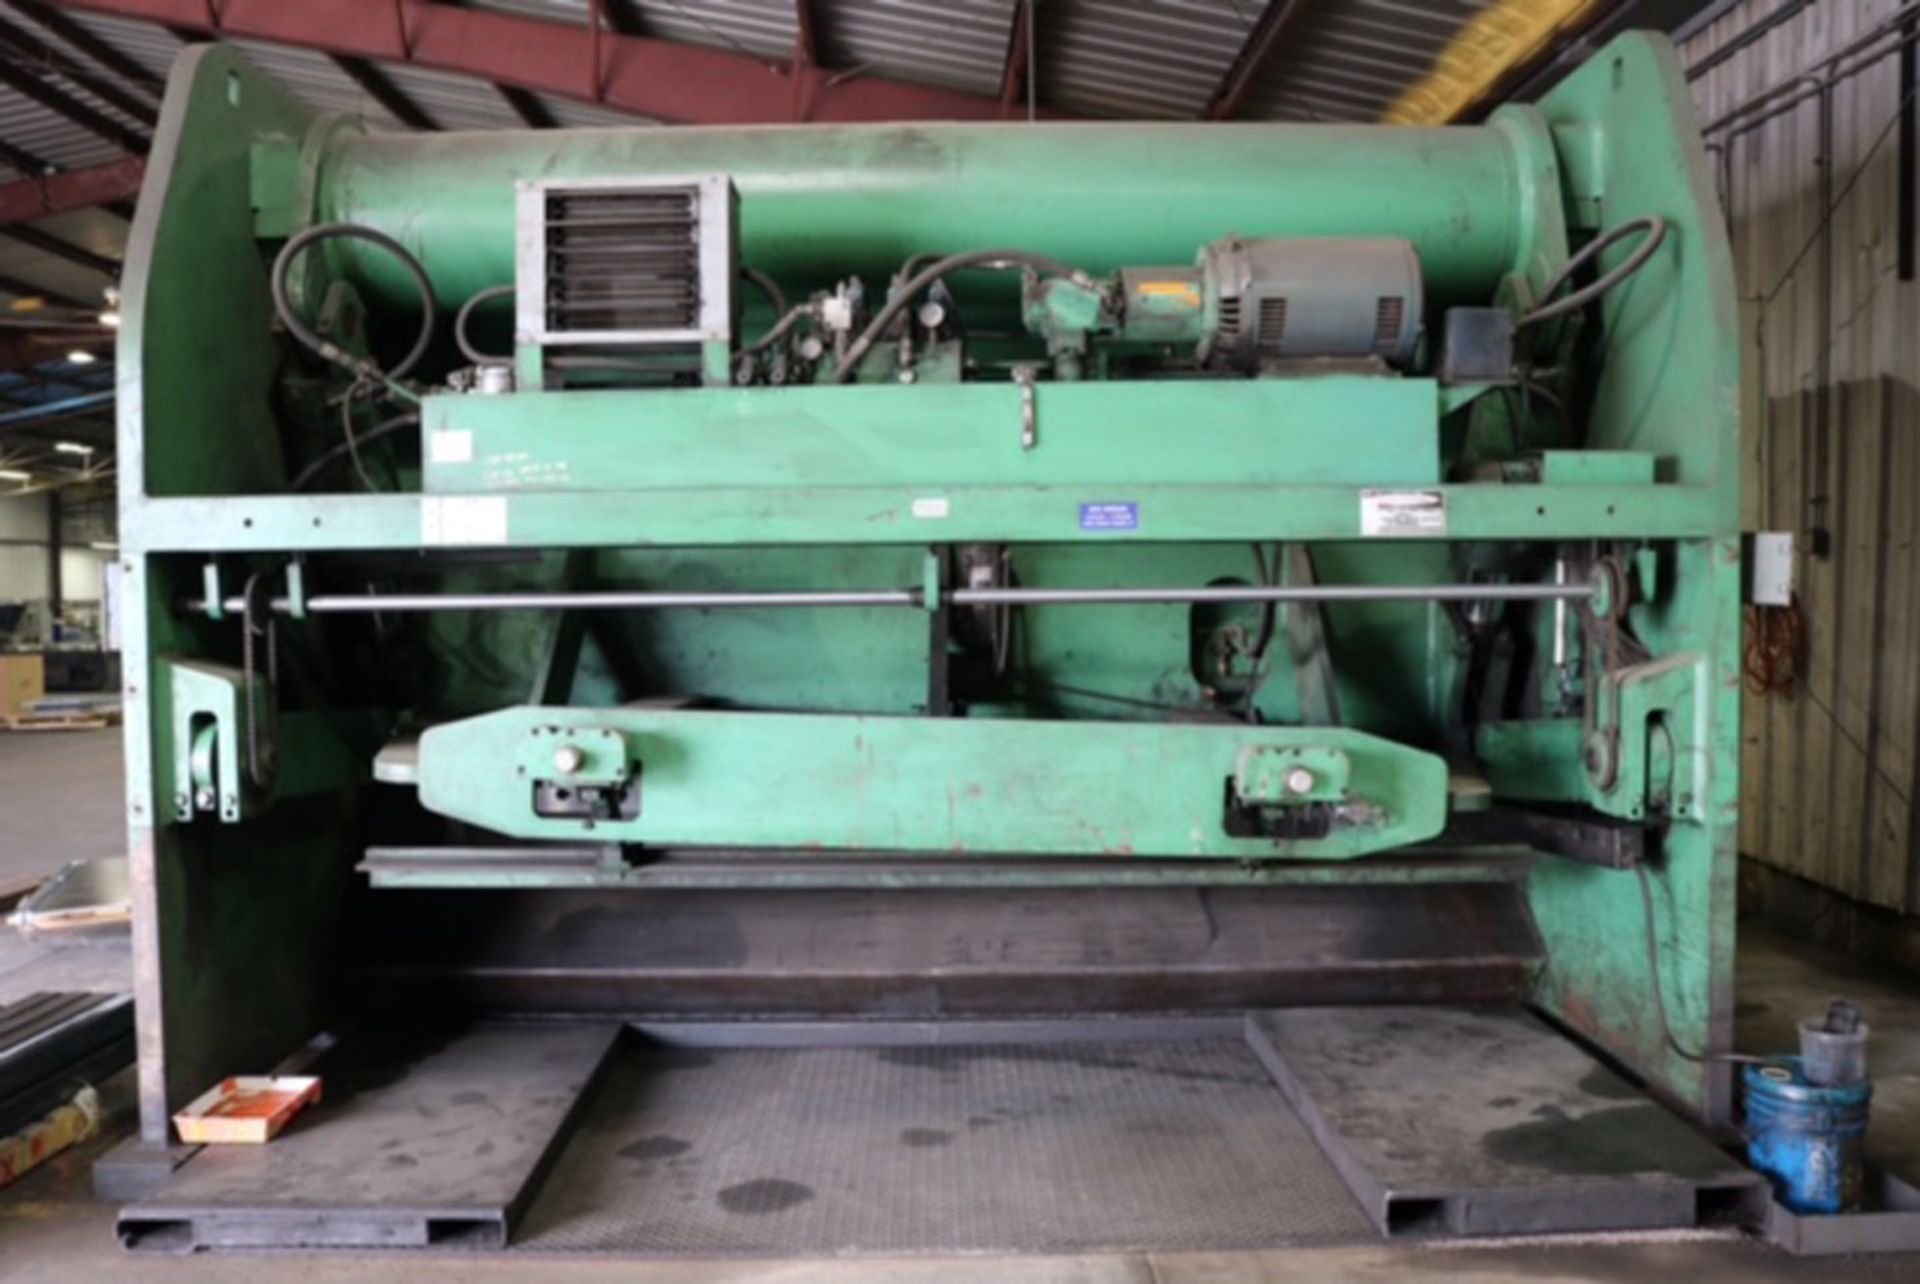 ACCURSHEAR HYDRAULIC POWER SHEAR, MDL 8100012, YEAR: 1999, ACCURSHEAR SC2 PROGRAMMABLE FRONT - Image 4 of 7